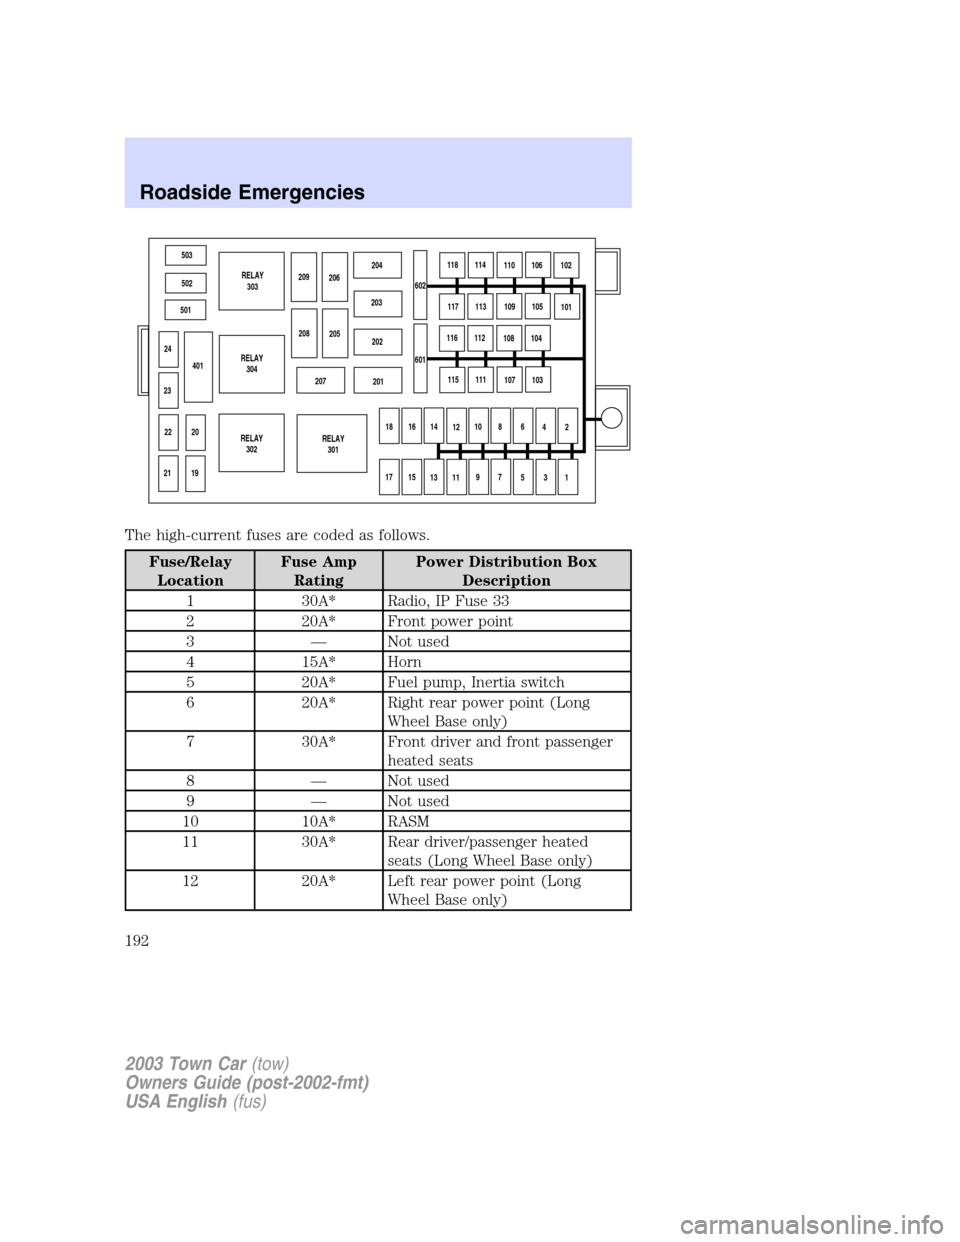 LINCOLN TOWN CAR 2003  Owners Manual The high-current fuses are coded as follows.
Fuse/Relay
LocationFuse Amp
RatingPower Distribution Box
Description
1 30A* Radio, IP Fuse 33
2 20A* Front power point
3—Not used
4 15A* Horn
5 20A* Fuel